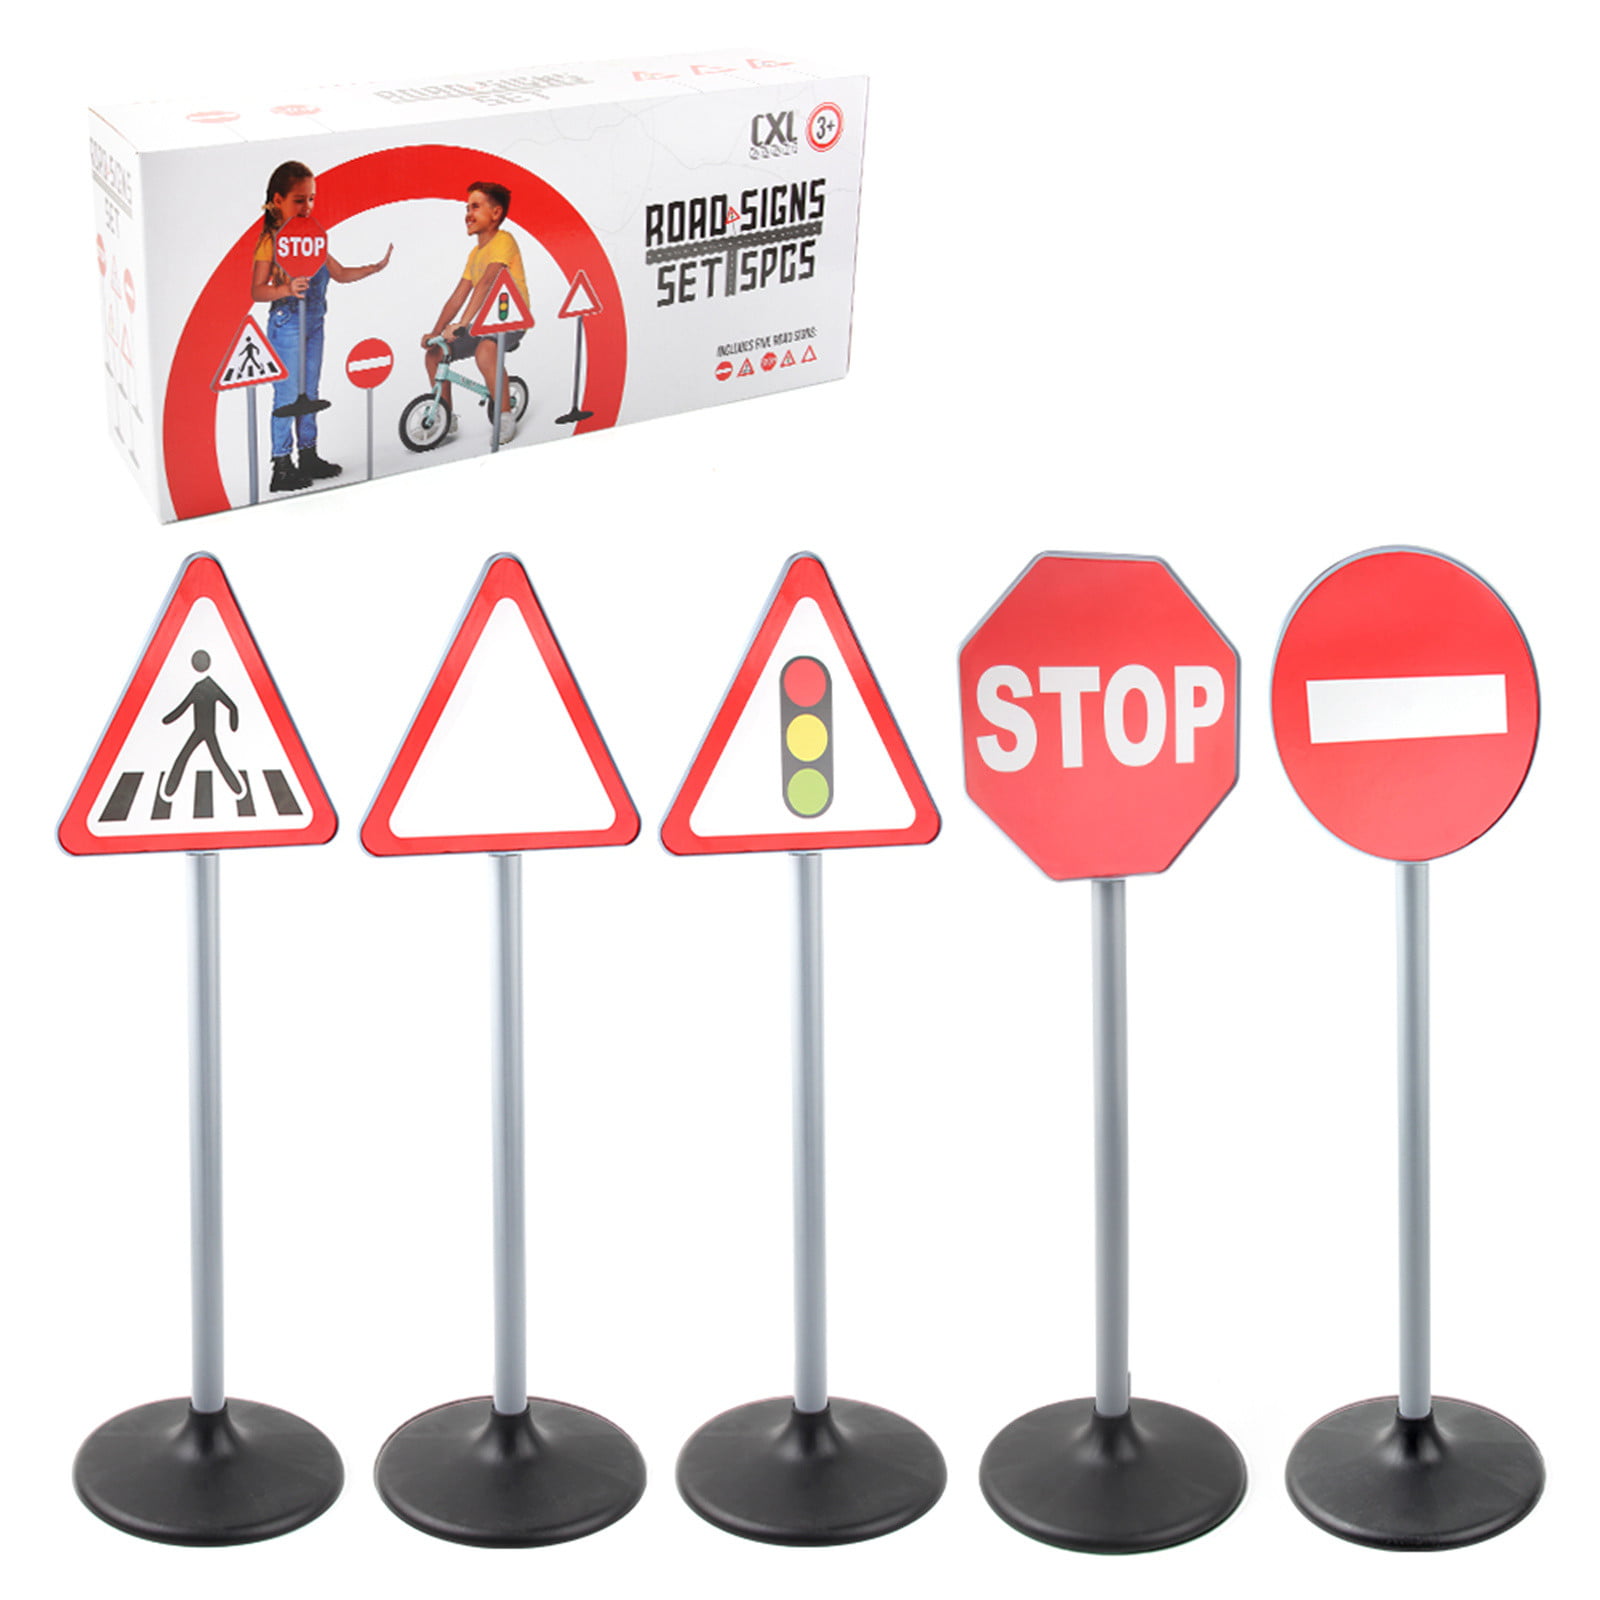 Details about   28 Pcs Car Toy Accessories Traffic Road Signs Kids Children Play Learn Toy Game 